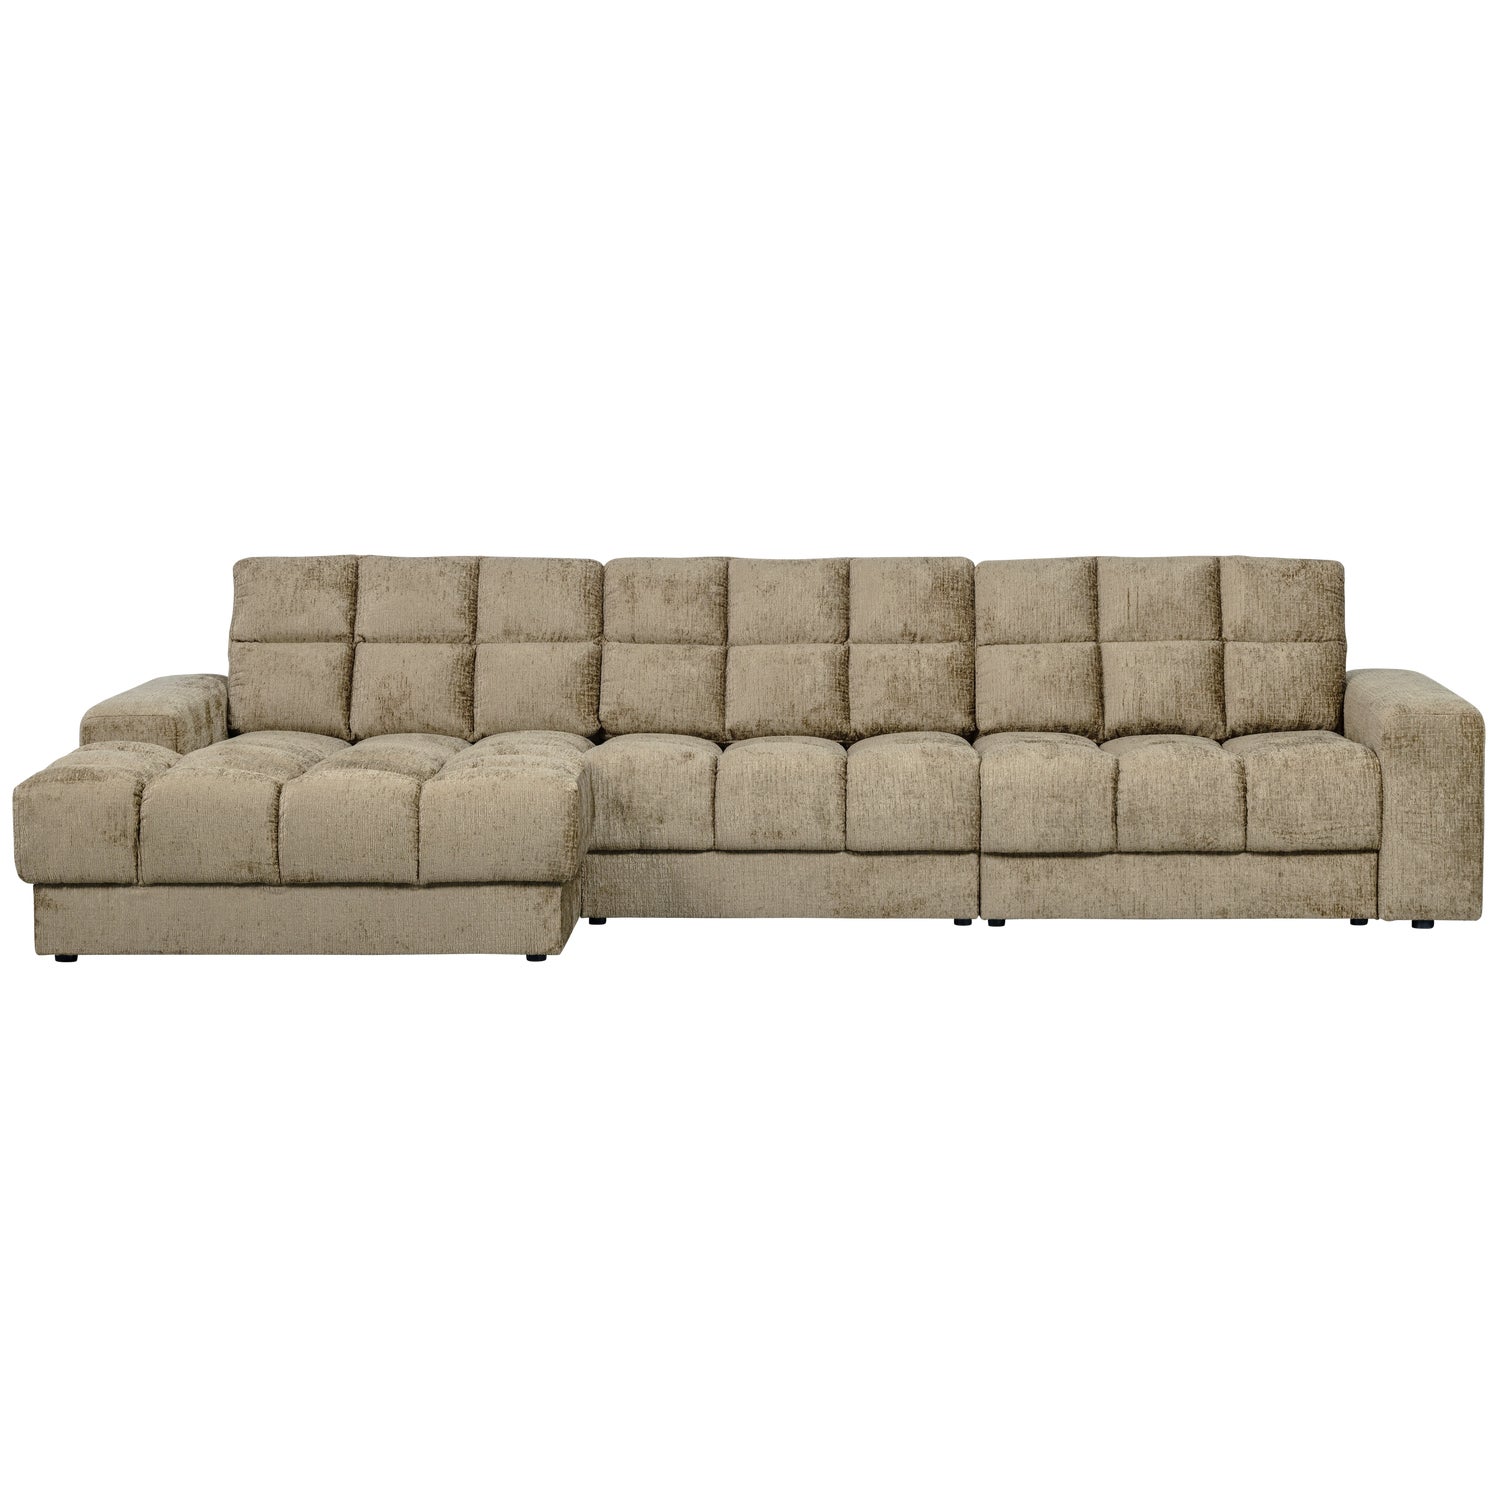 379012-WH-01_VS_WE_Second_date_chaise_longue_links_structure_velvet_wheatfield.png?auto=webp&format=png&width=1500&height=1500